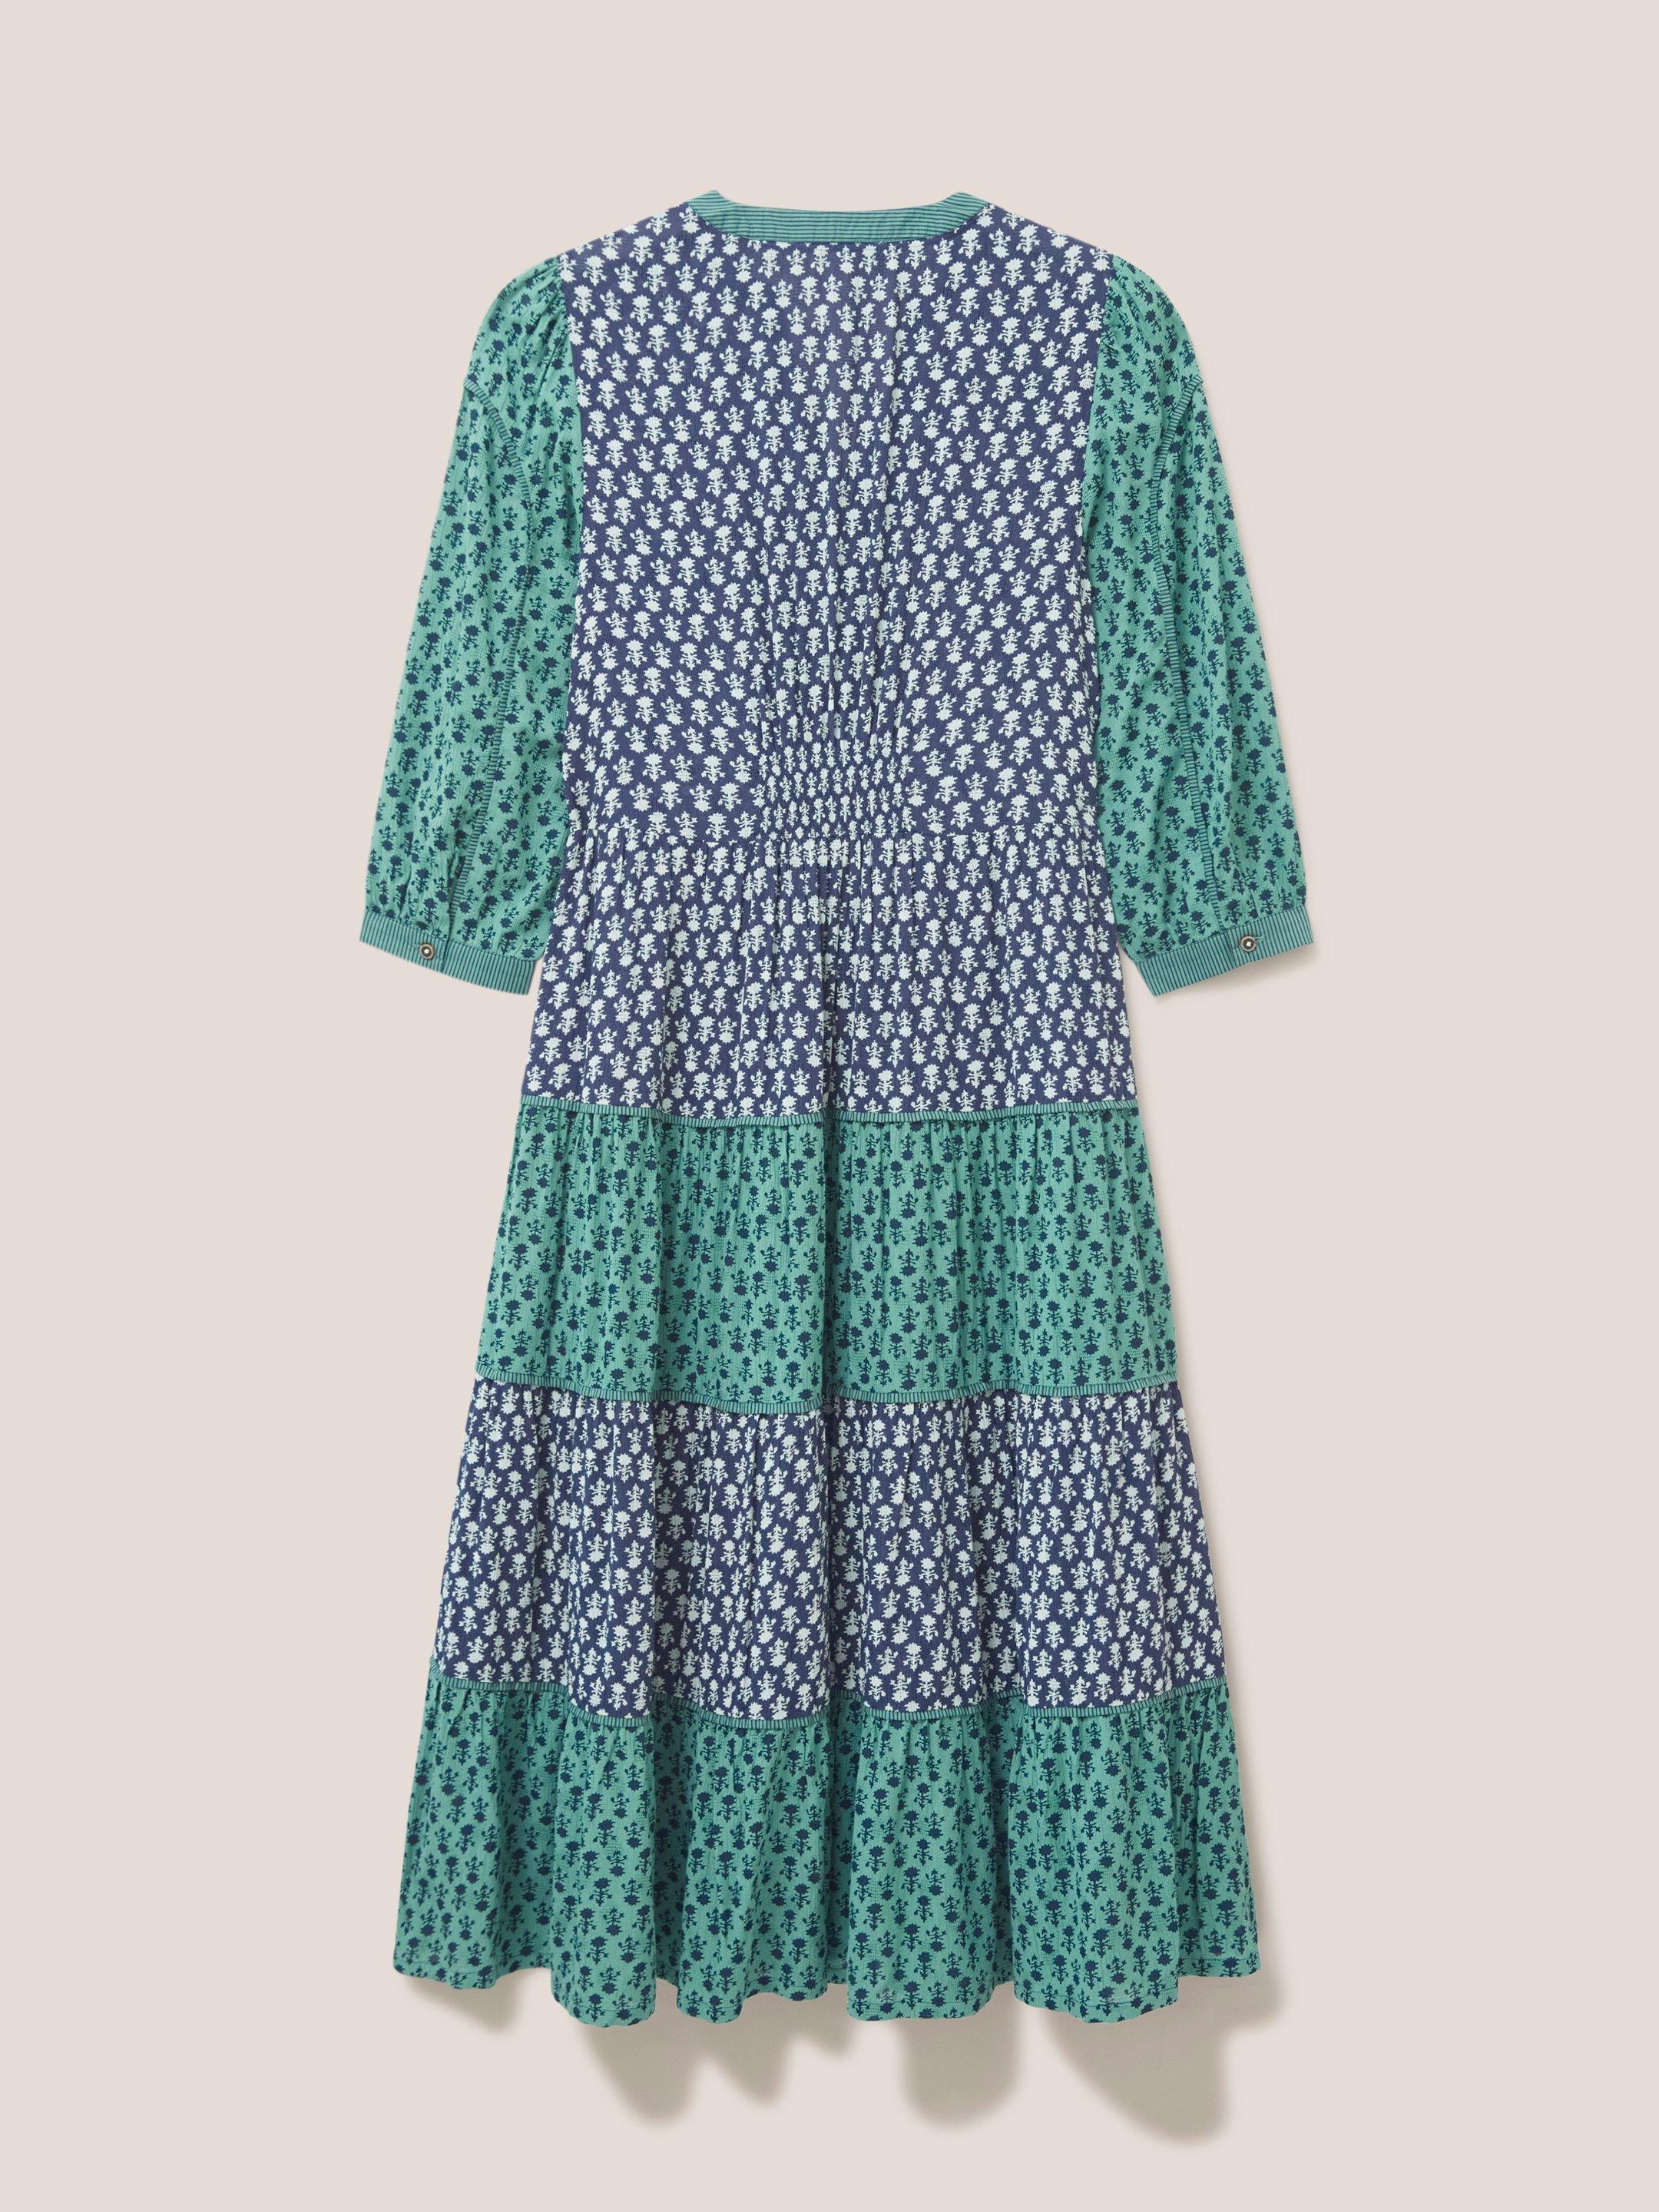 Mabel Mixed Print Dress in TEAL MLT - FLAT BACK